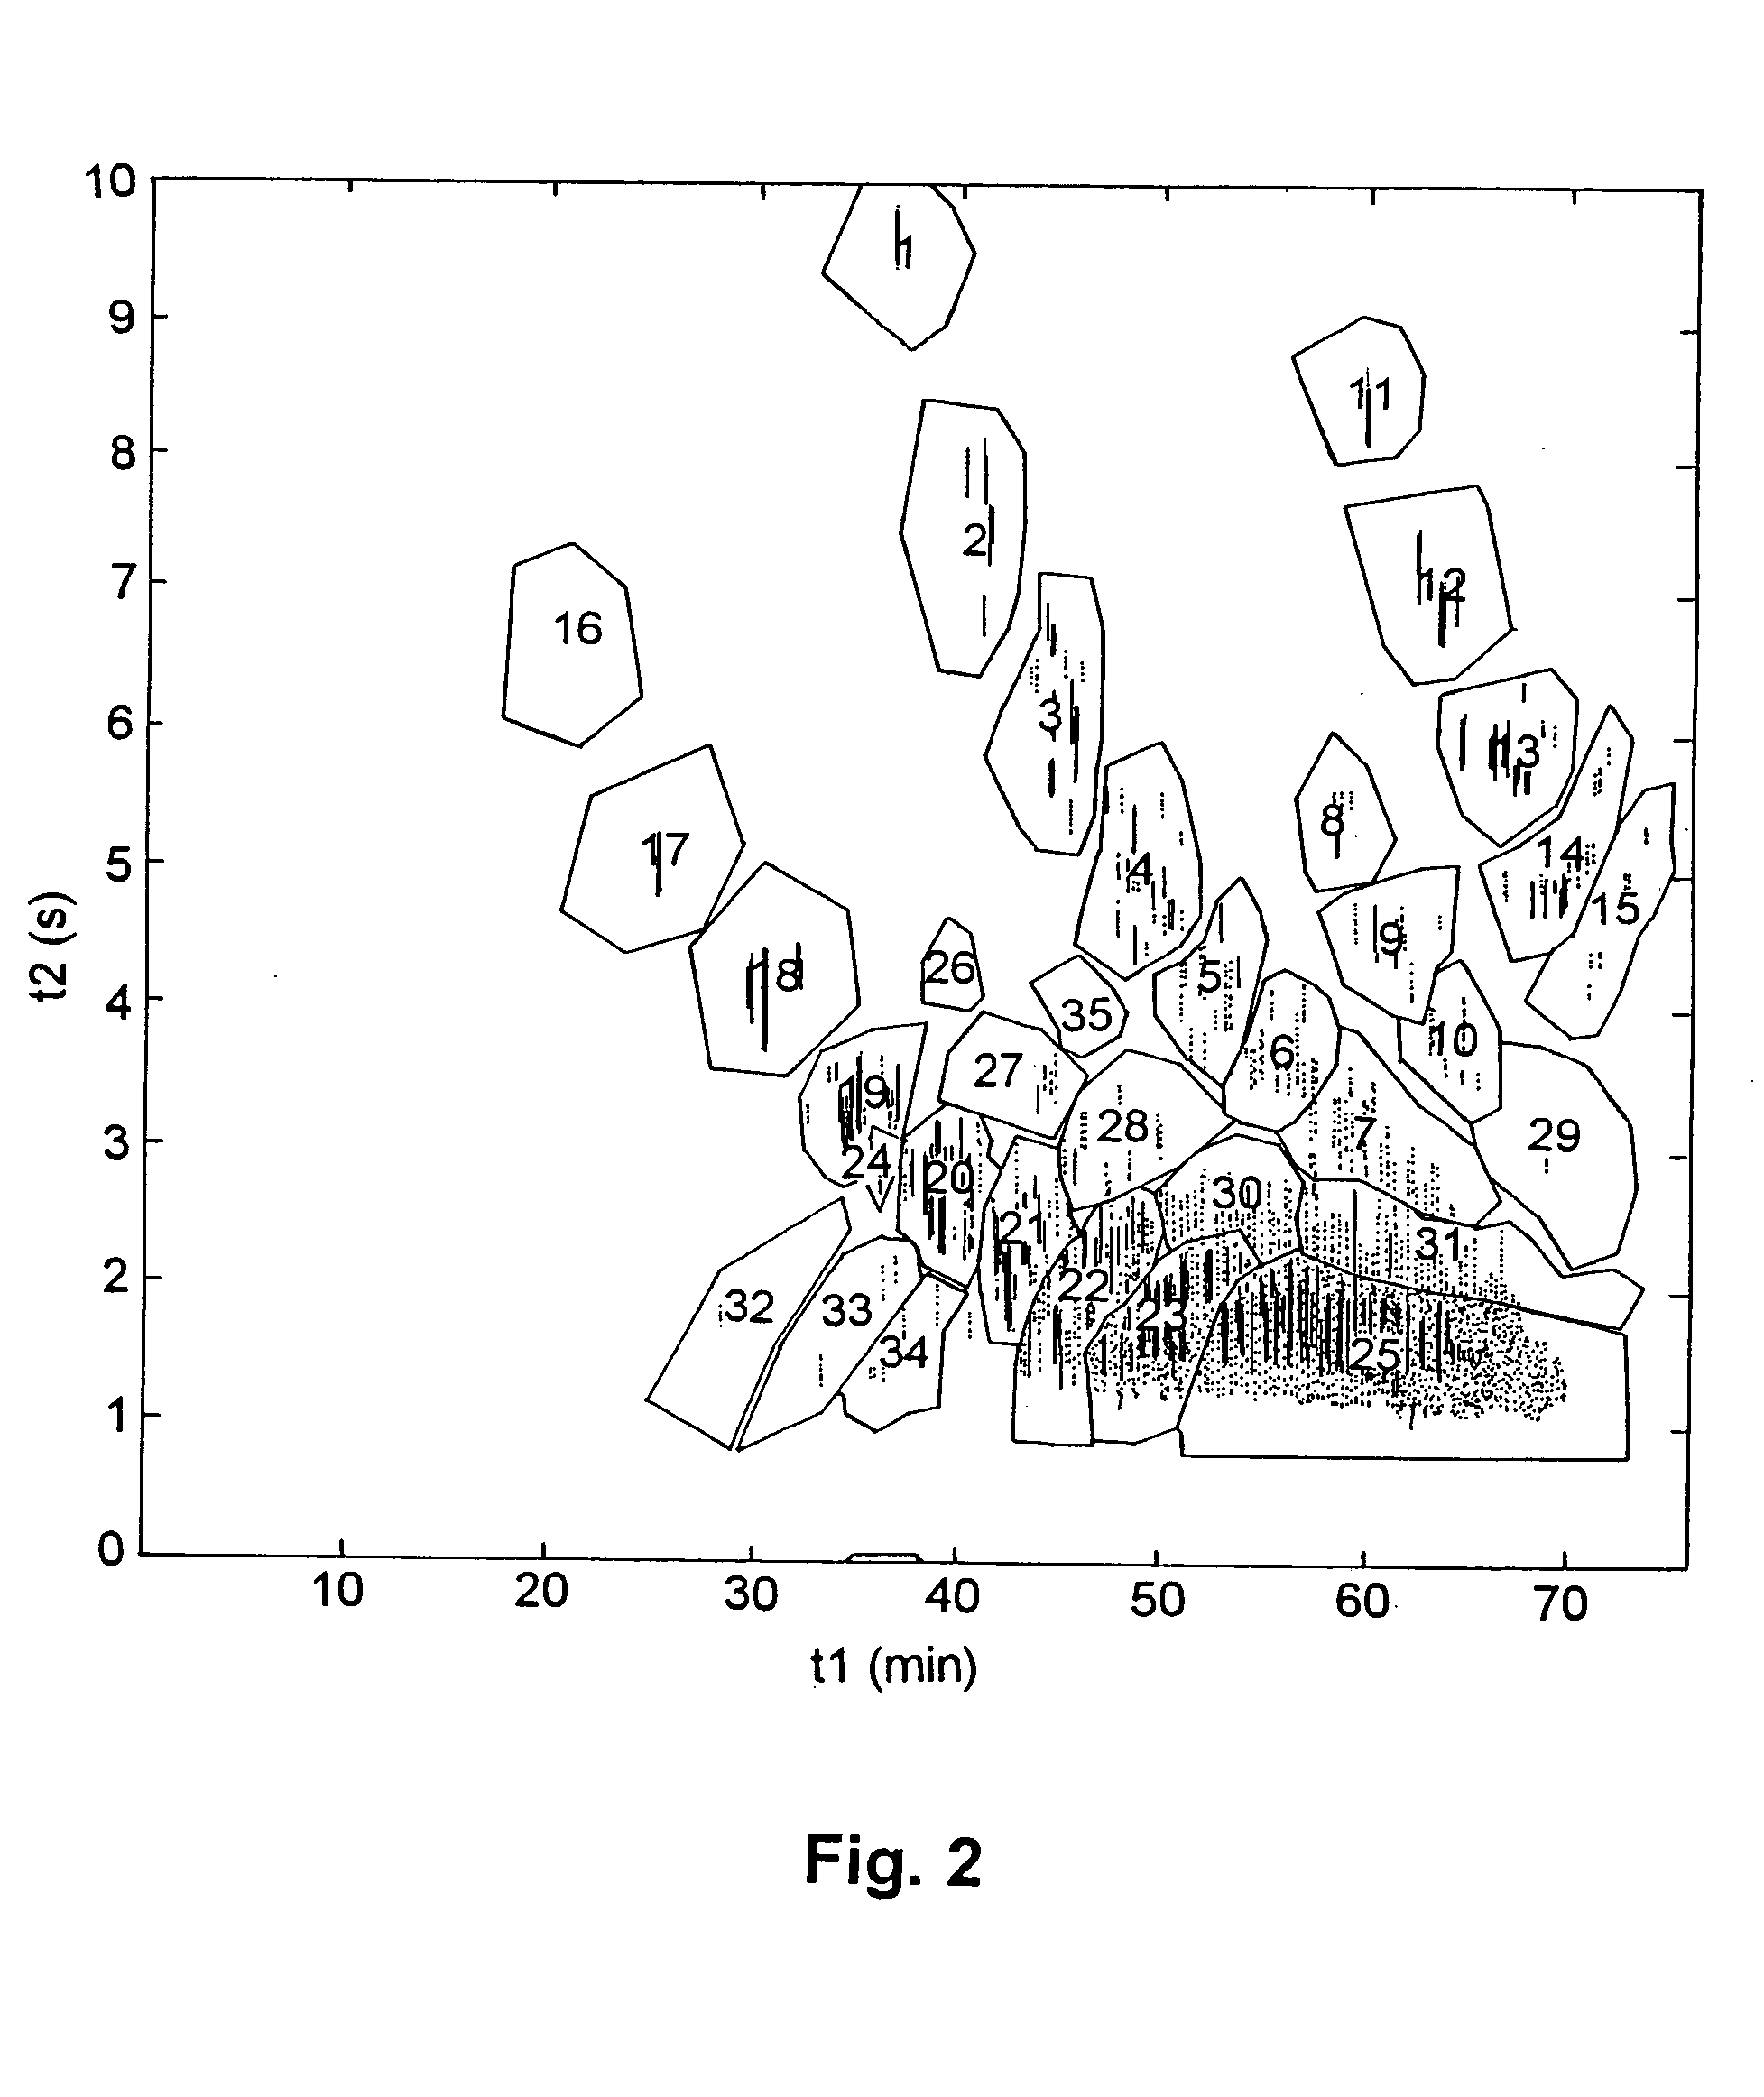 Method of determining physico-chemical properties of a petroleum sample from two-dimensional gas chromatography